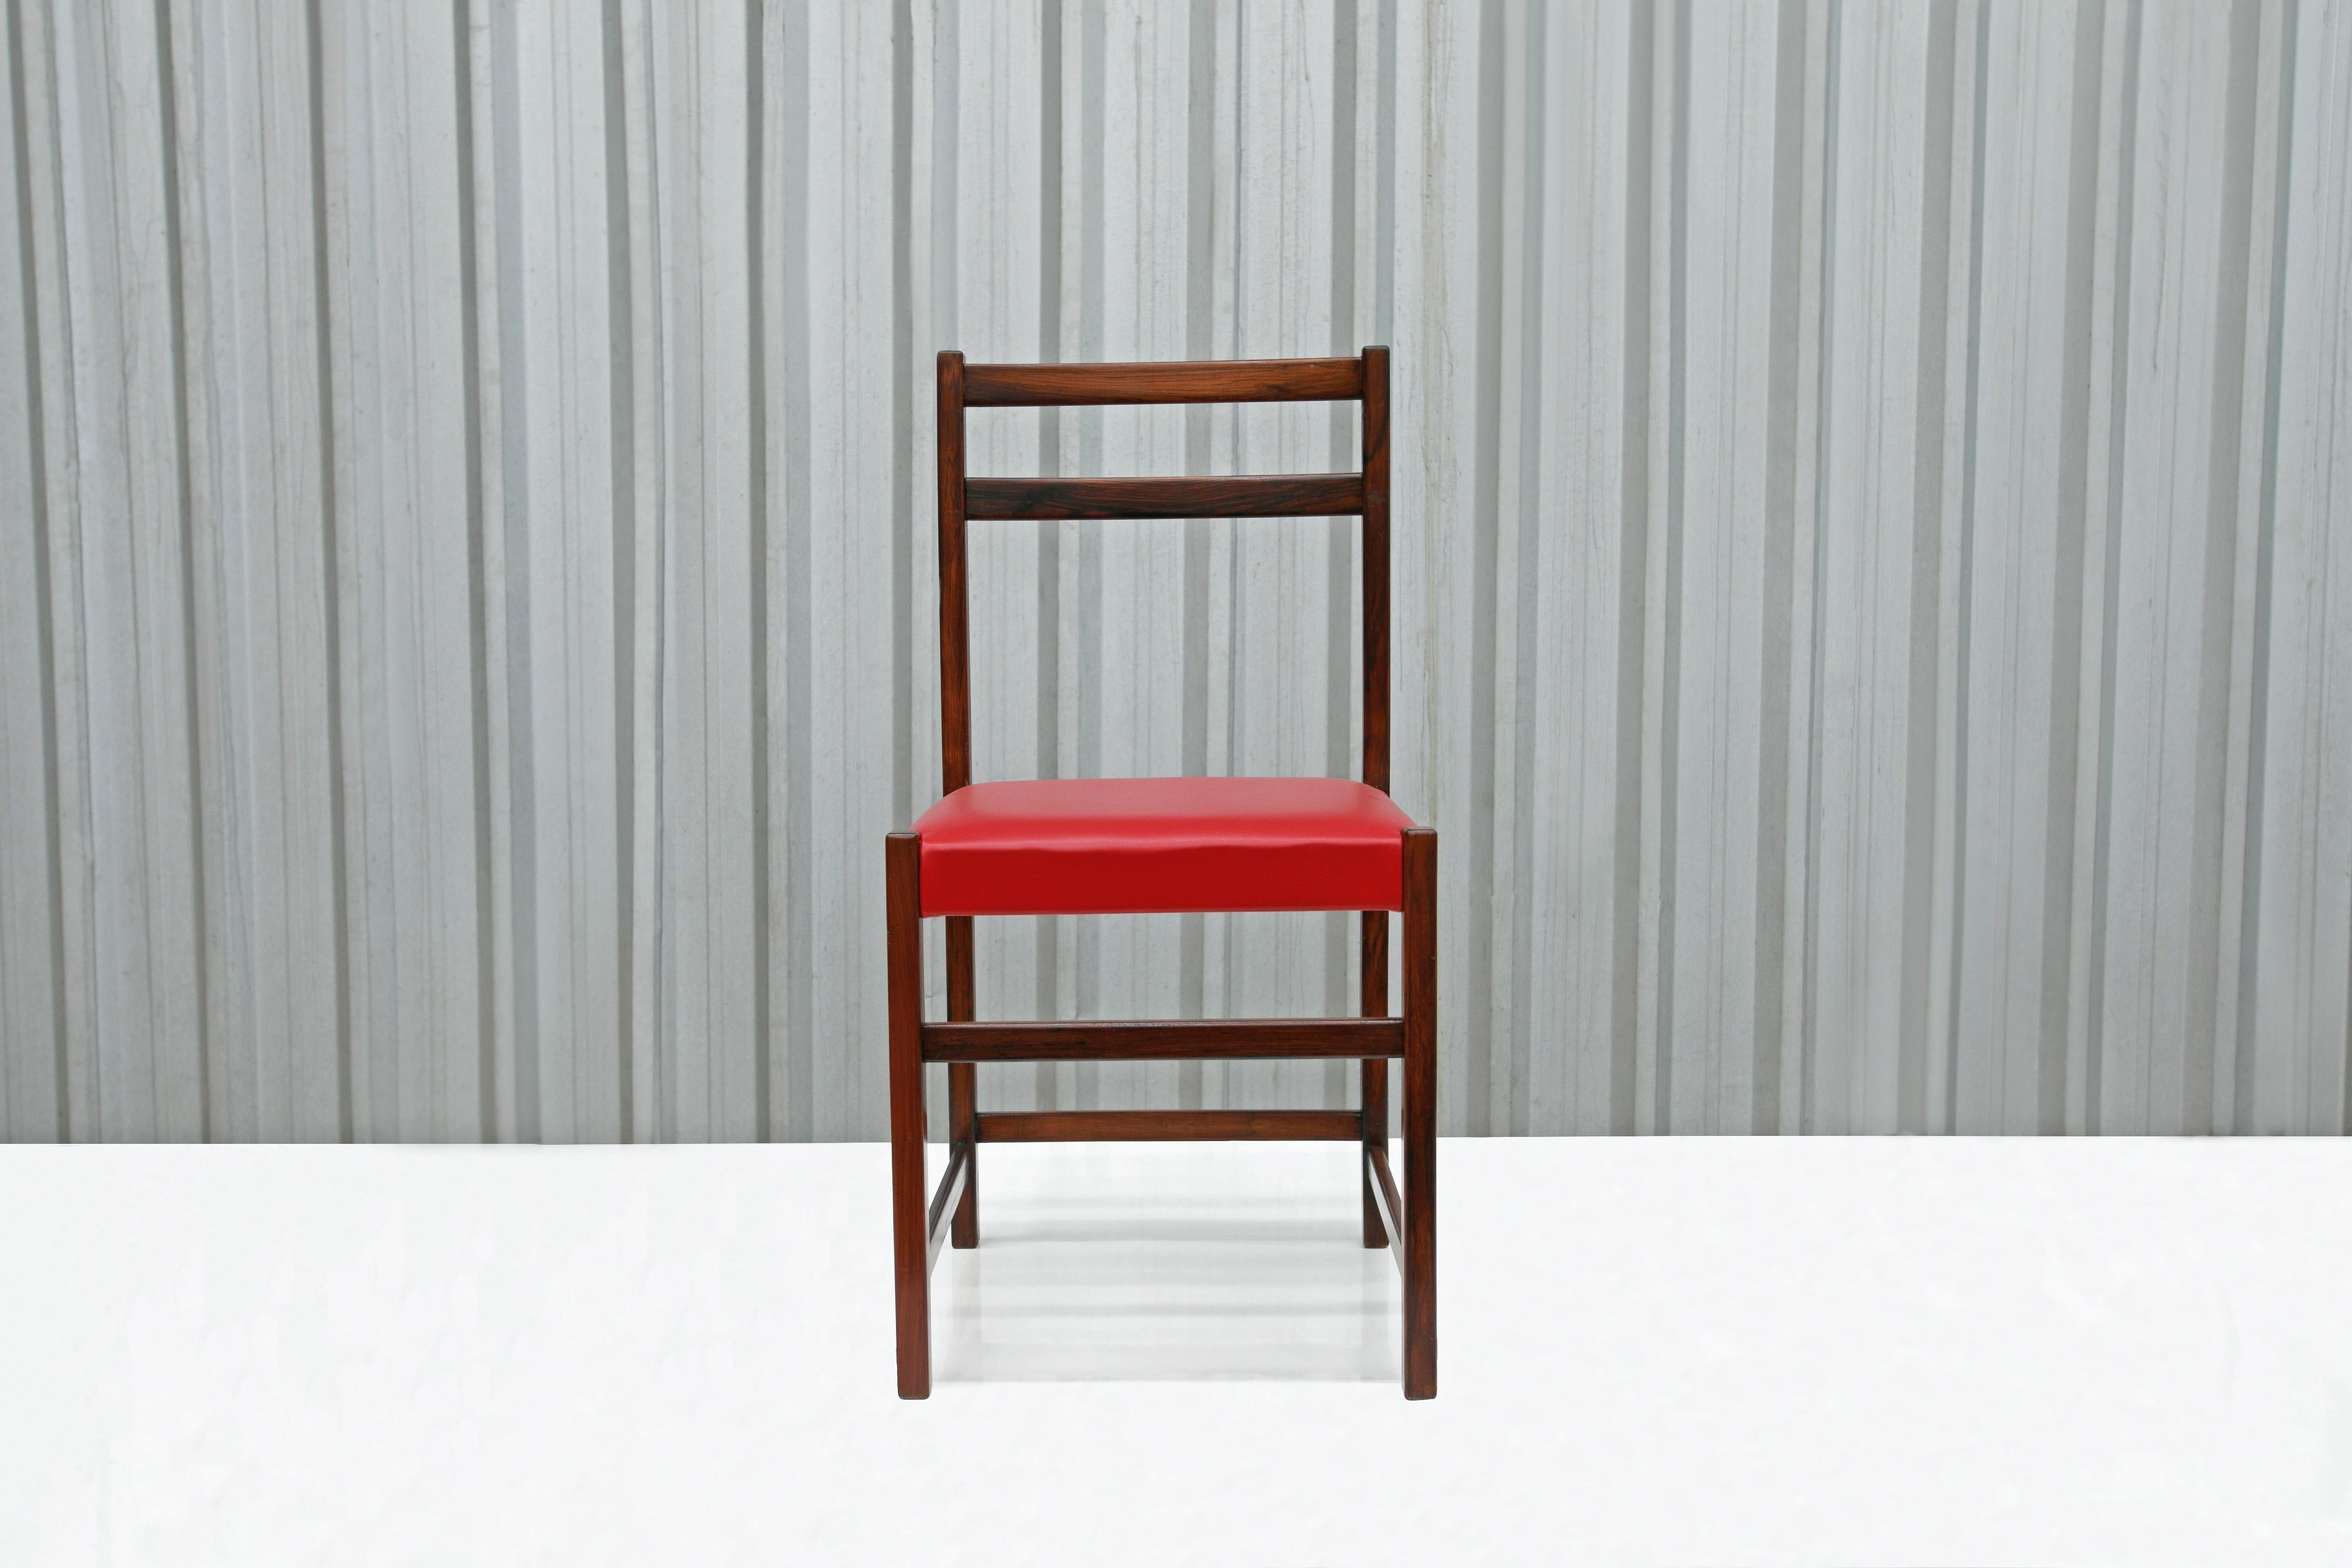 Brazilian Set of Six Chairs in Hardwood & Red Leather by Celina Decoracoes, 1960s  For Sale